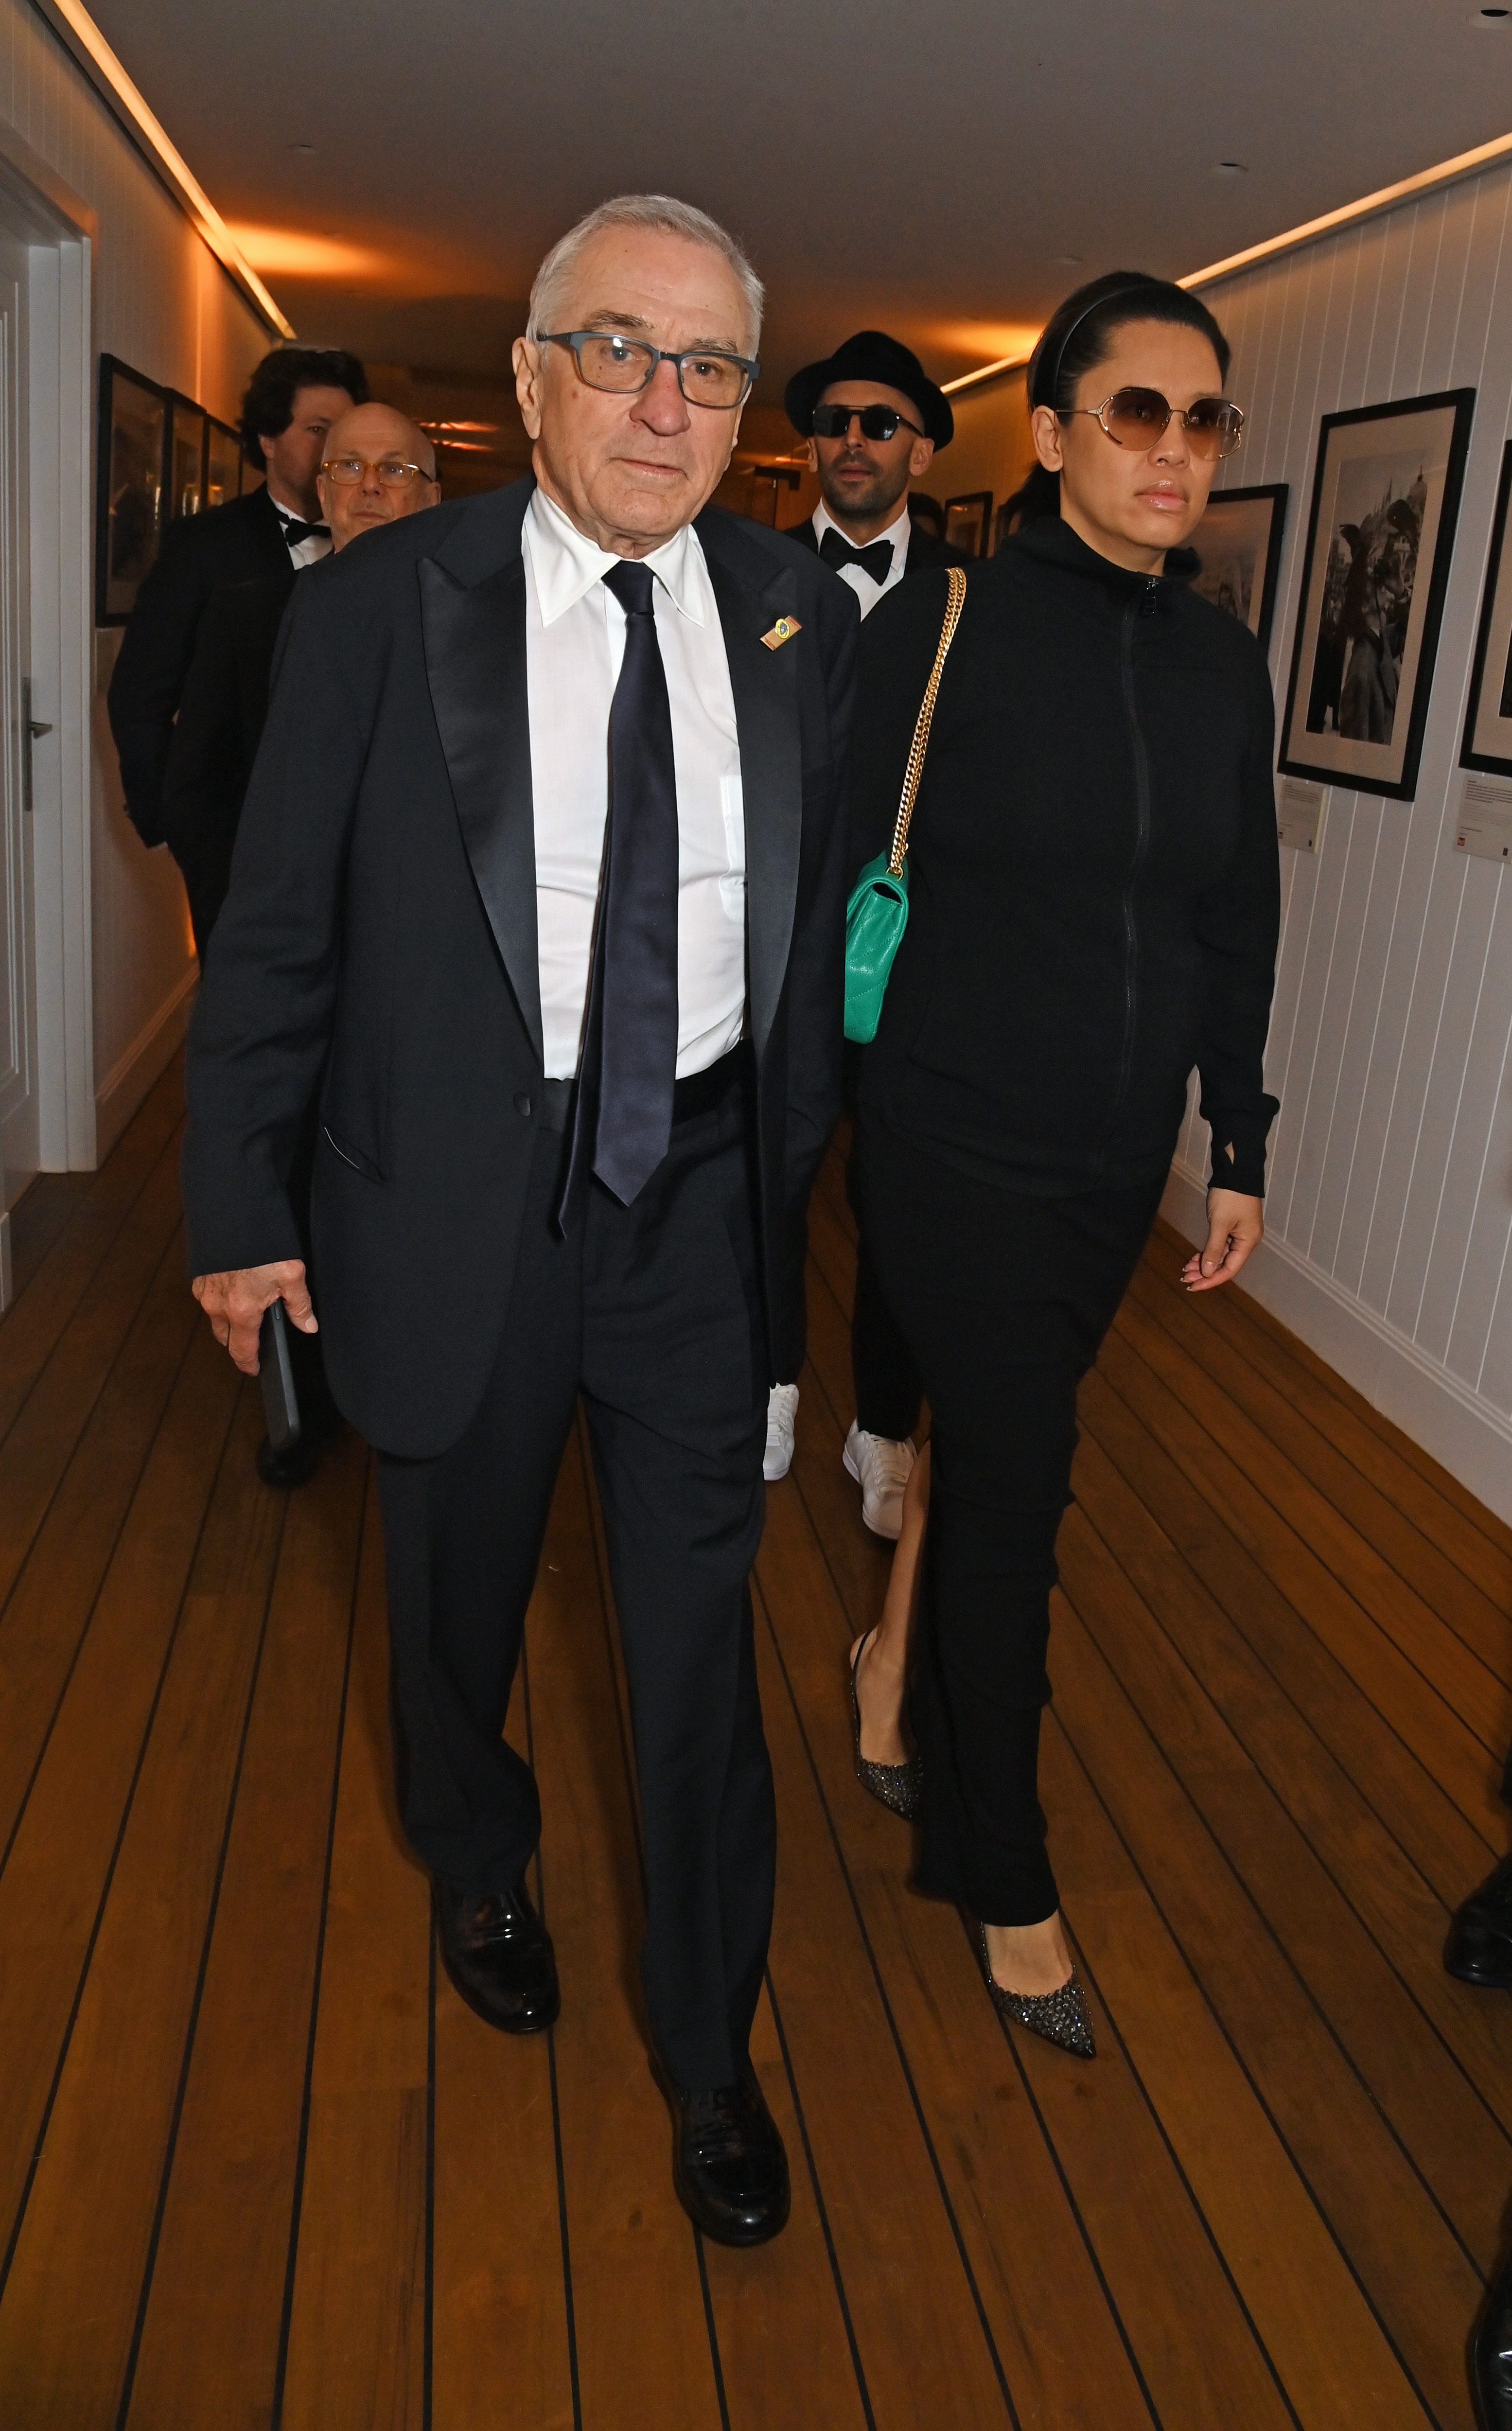 Robert DeNiro and Tiffany Chen at the Vanity Fair x Prada Party during the 2023 Cannes Film Festival at Hotel du Cap-Eden-Roc on May 20, 2023 in Cap d'Antibes, France | Source: Getty Images